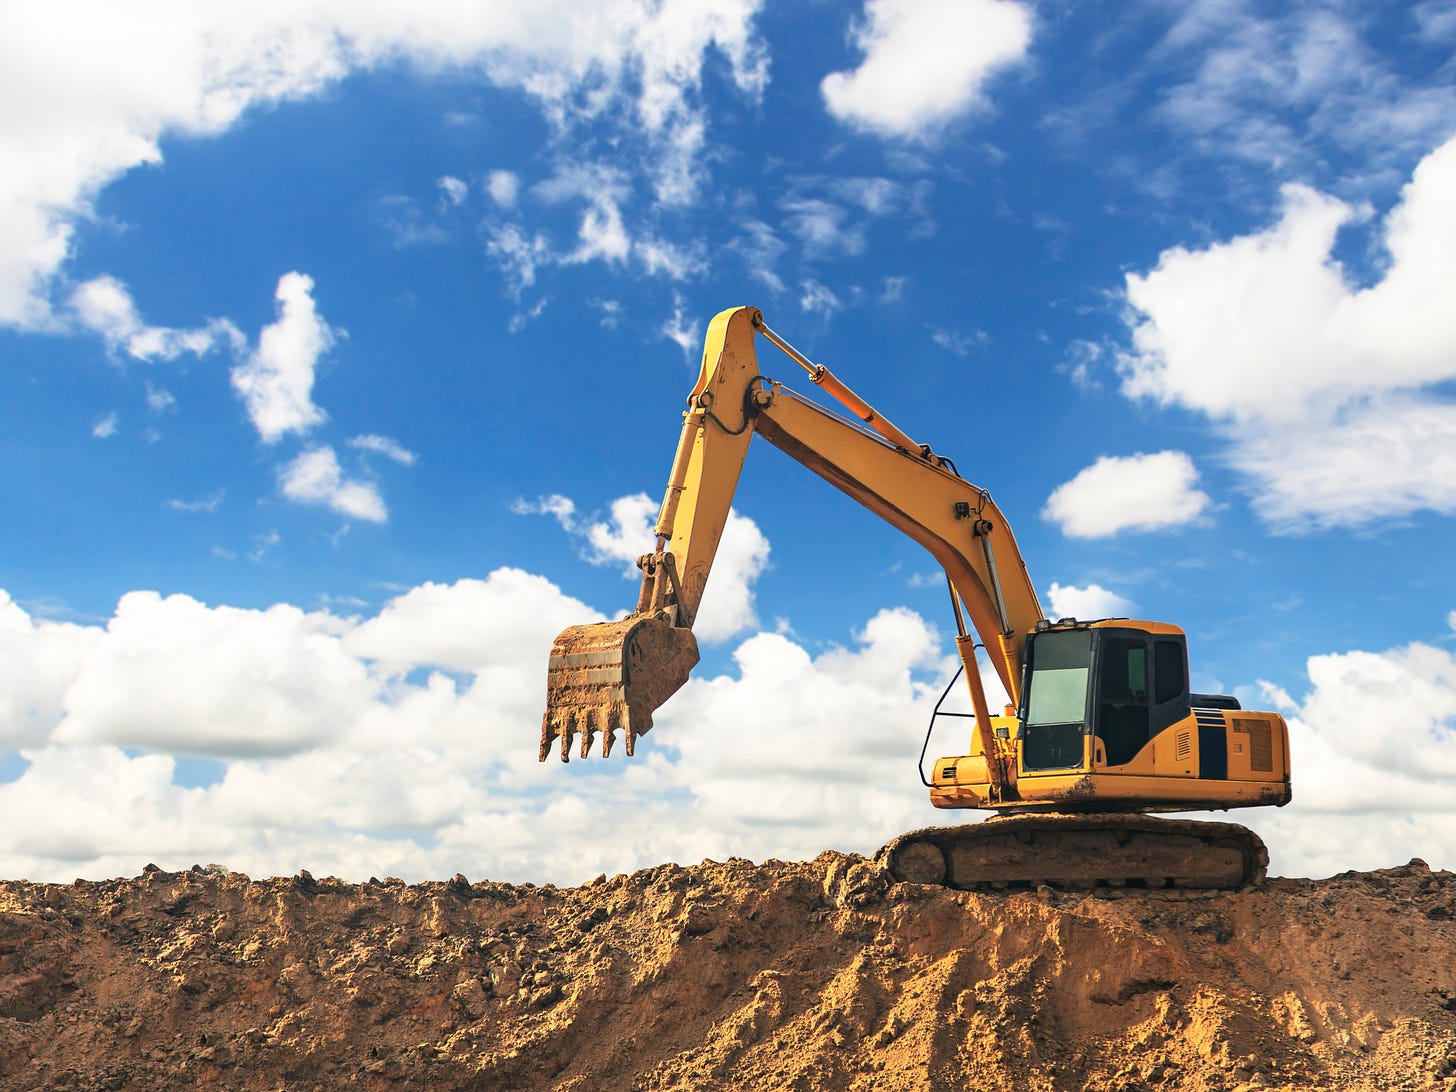 photo of an excavator on a pile of dirt against a blue sky with clouds